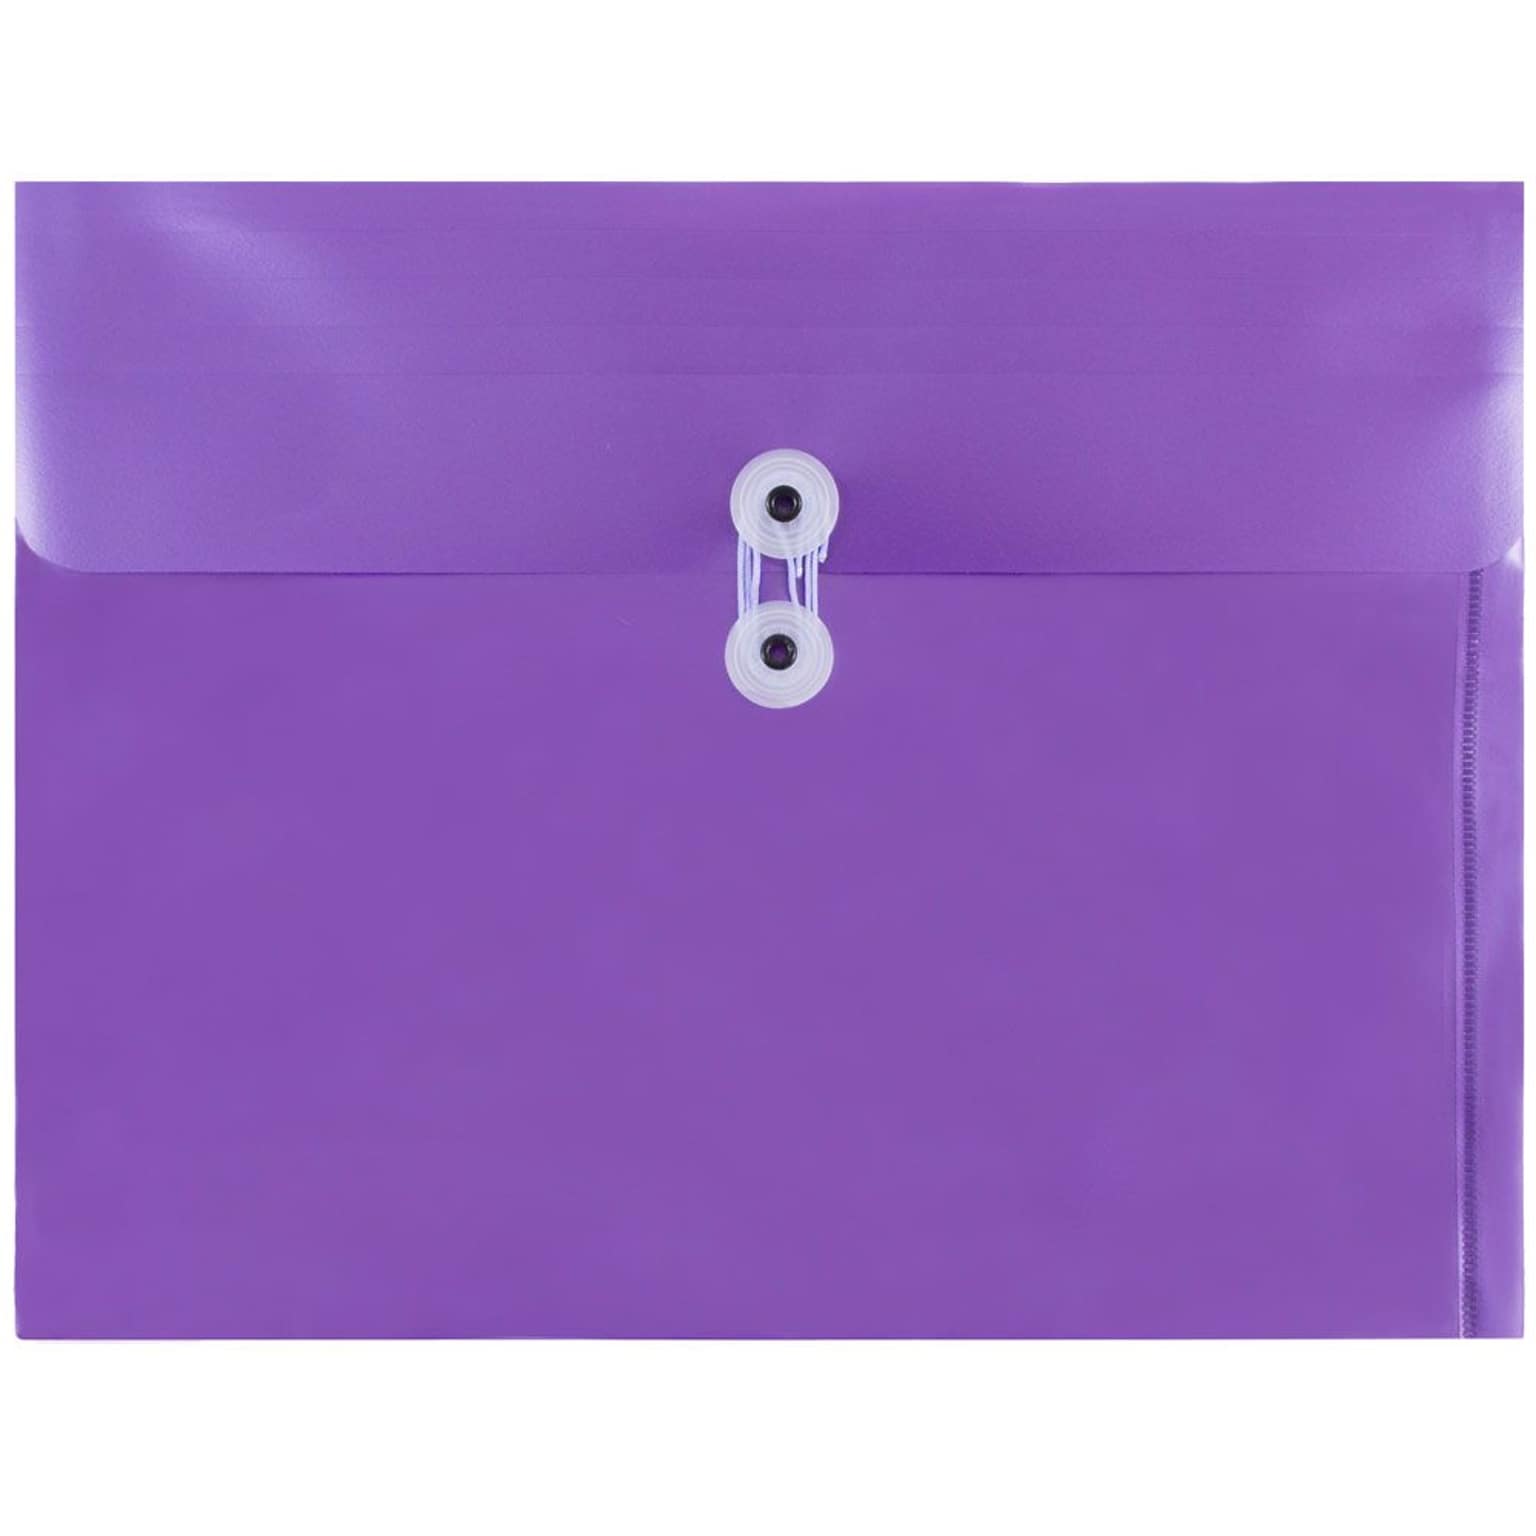 JAM Paper® Plastic Envelopes, Button and String Tie Closure, Letter Booklet, 9.75 x 13, Bright Purple Poly, 12/pack (1221562)